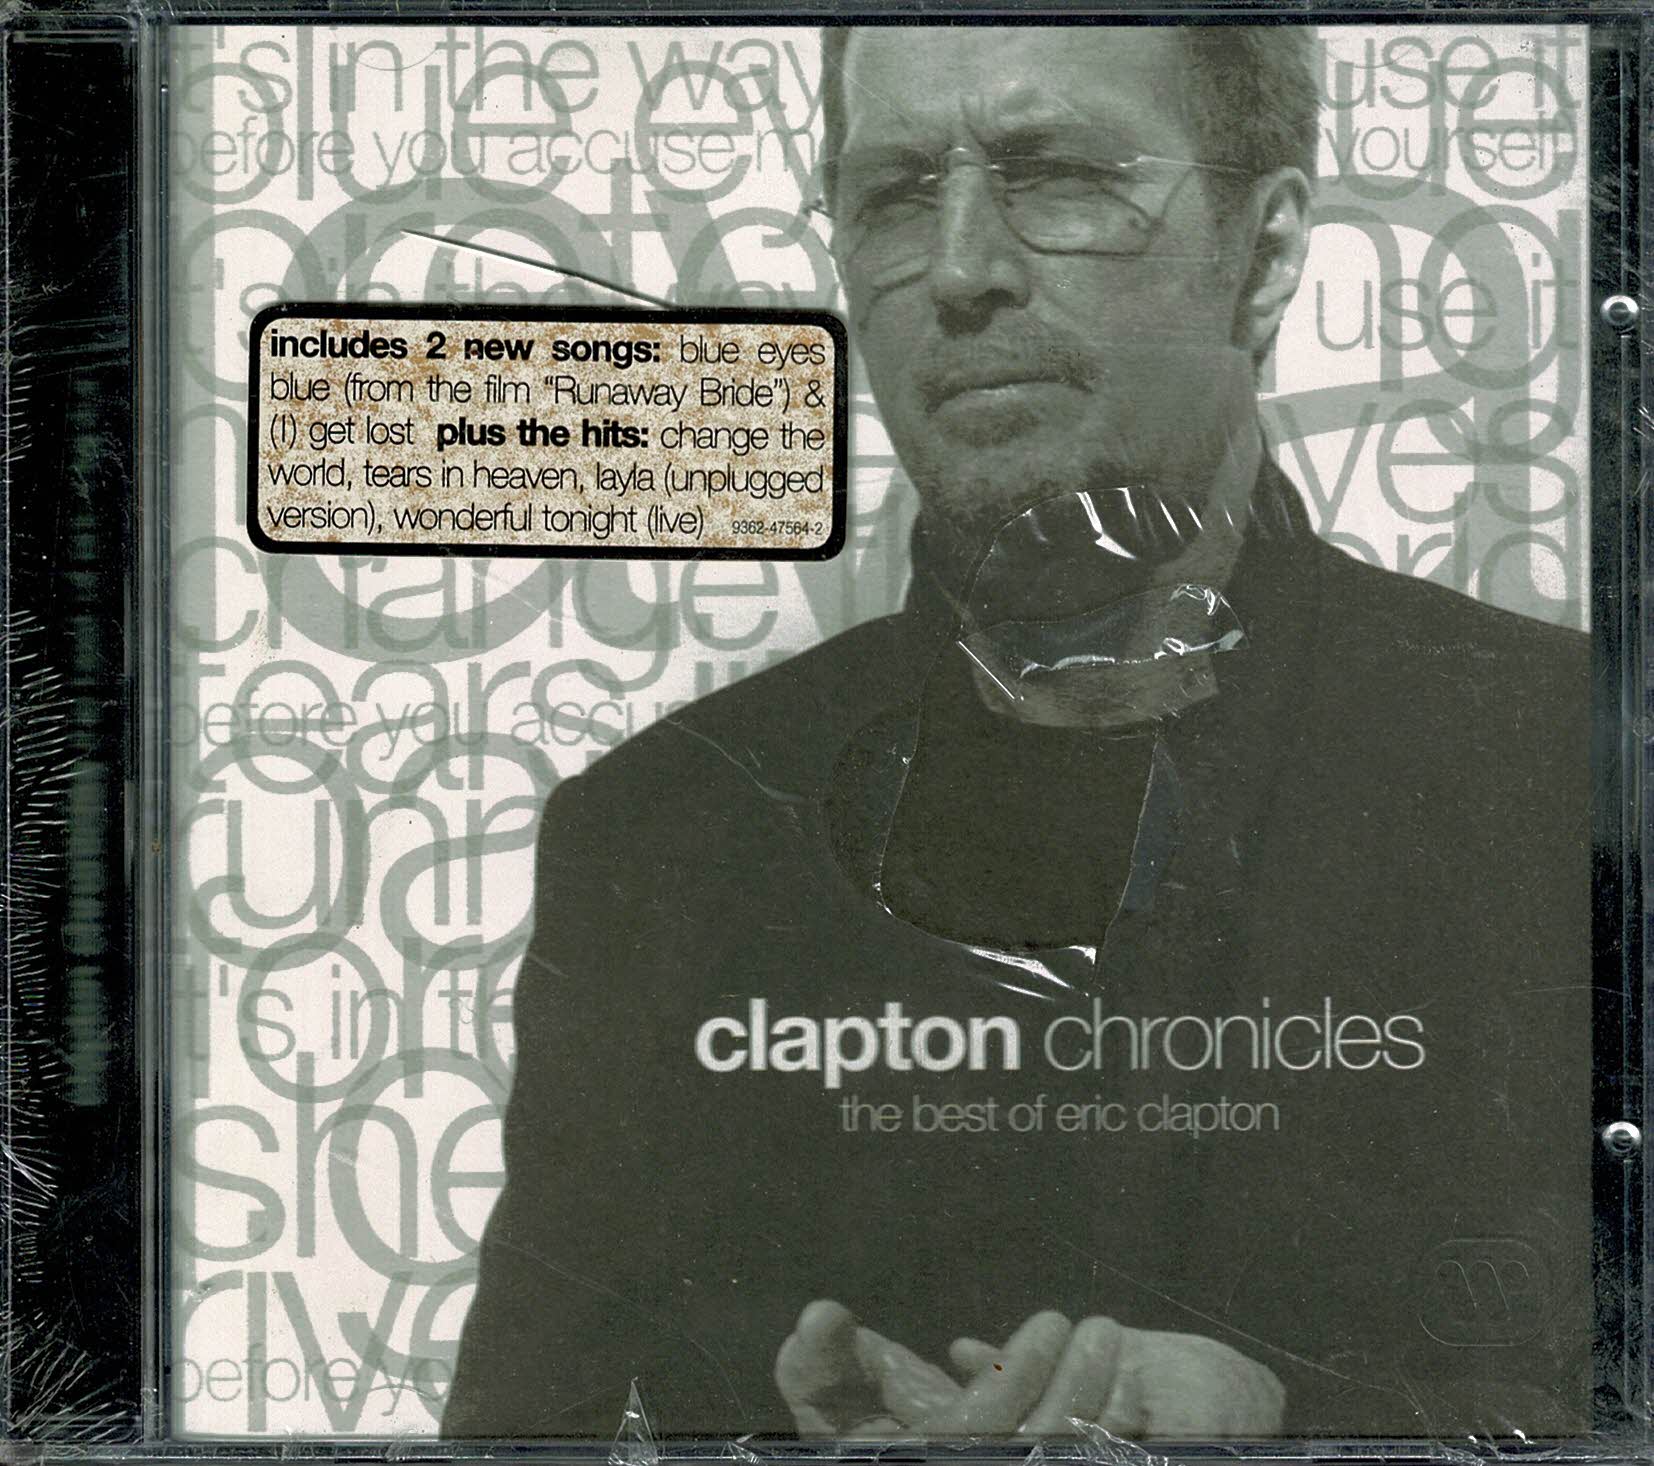 The Best of Eric Clapton- Clapton Chronicles